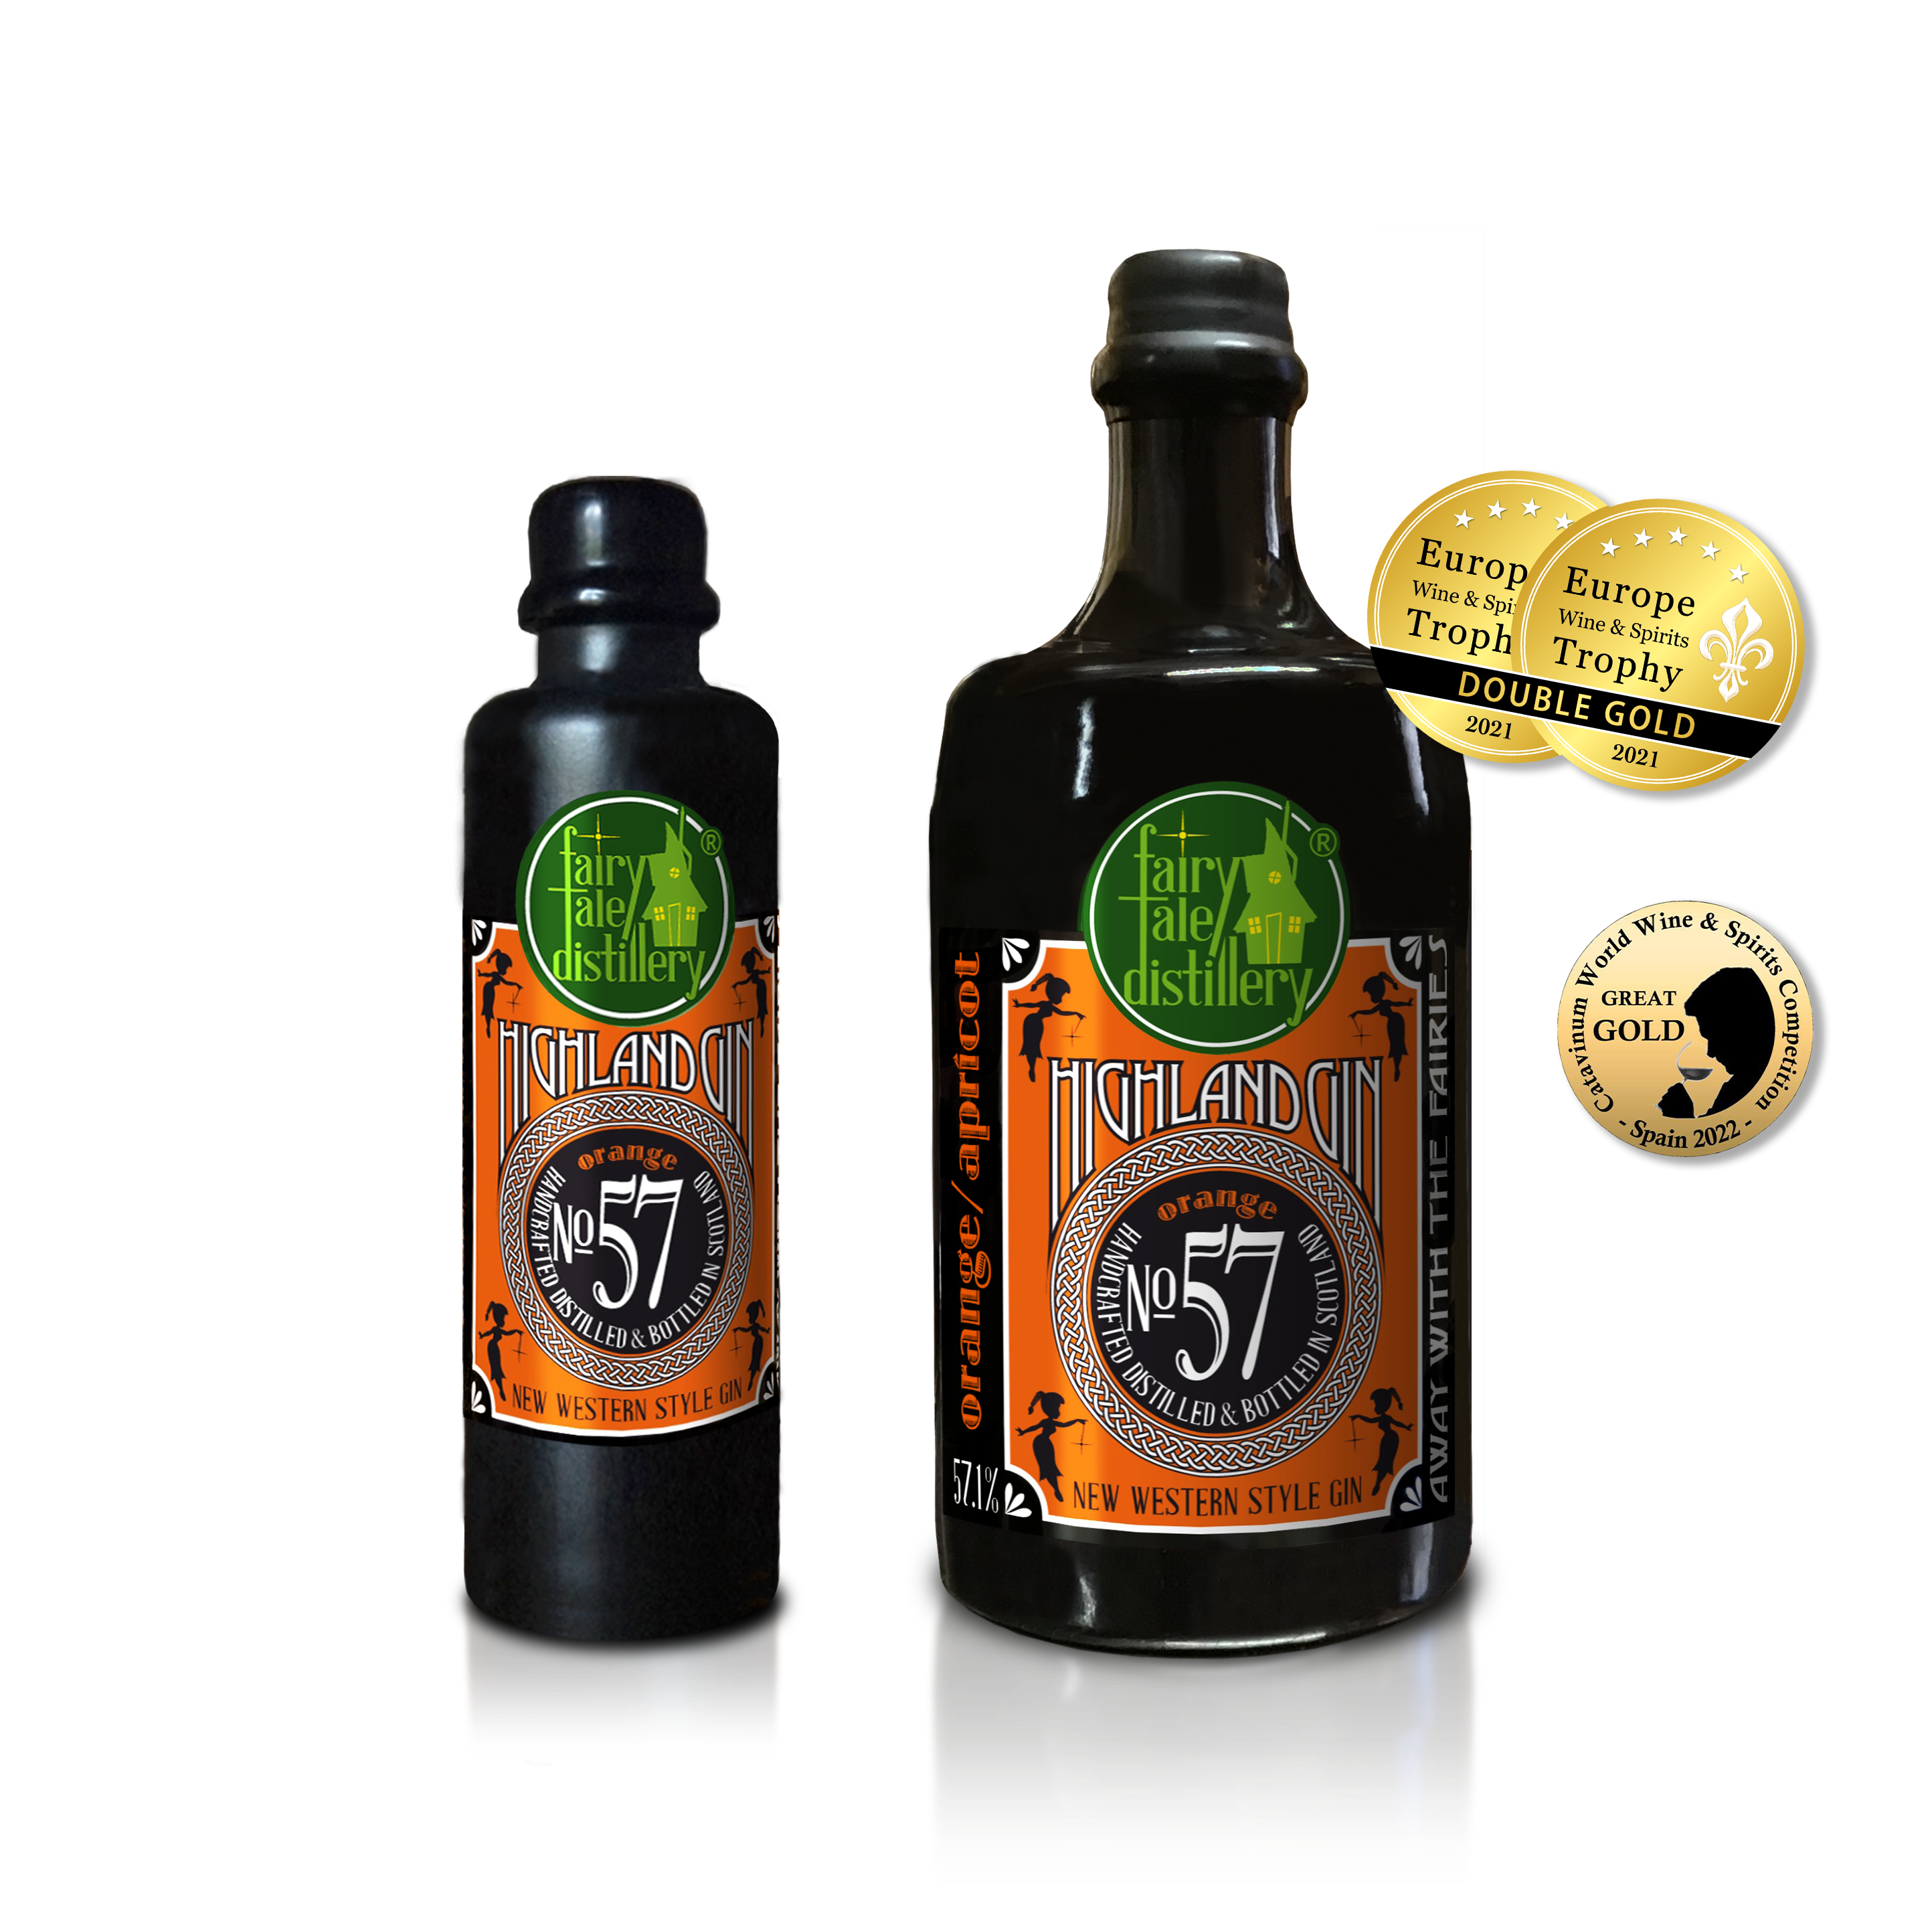 No 57 New Western Style Orange Gin bottle from Fairytale Distillery with Catavinum World Wine & Spirits Competition Spain 2022 Great Gold - Europe Wine & Spirits Trophy 2021 Double Gold